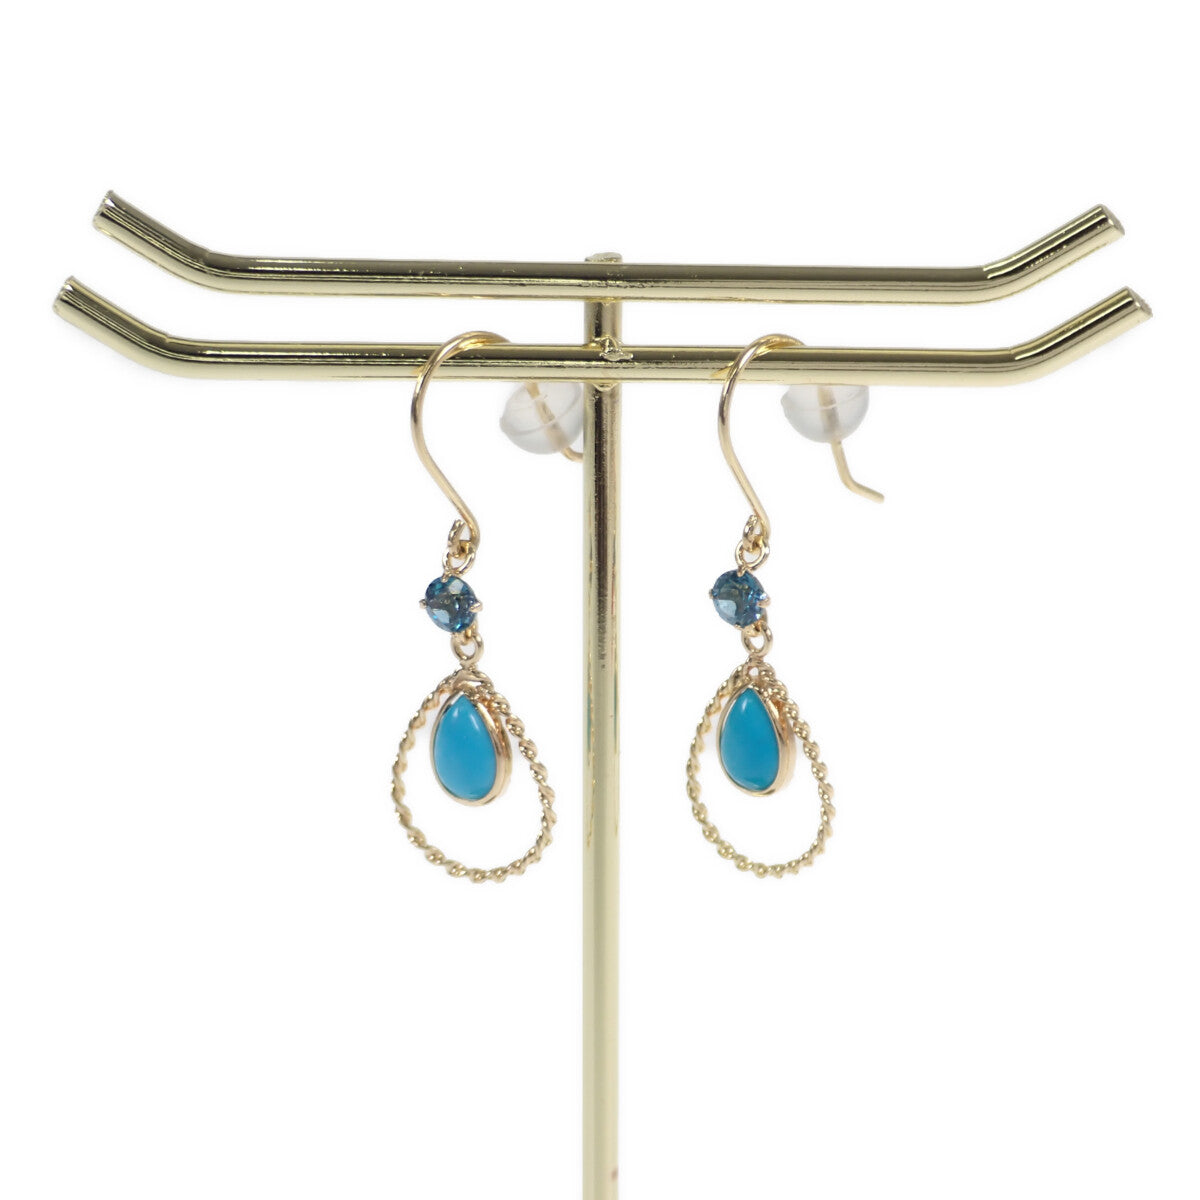 Women's 0.14ct Turquoise Drop Design Earrings in K18 Yellow Gold, Gold, Never Used, Pre-owned